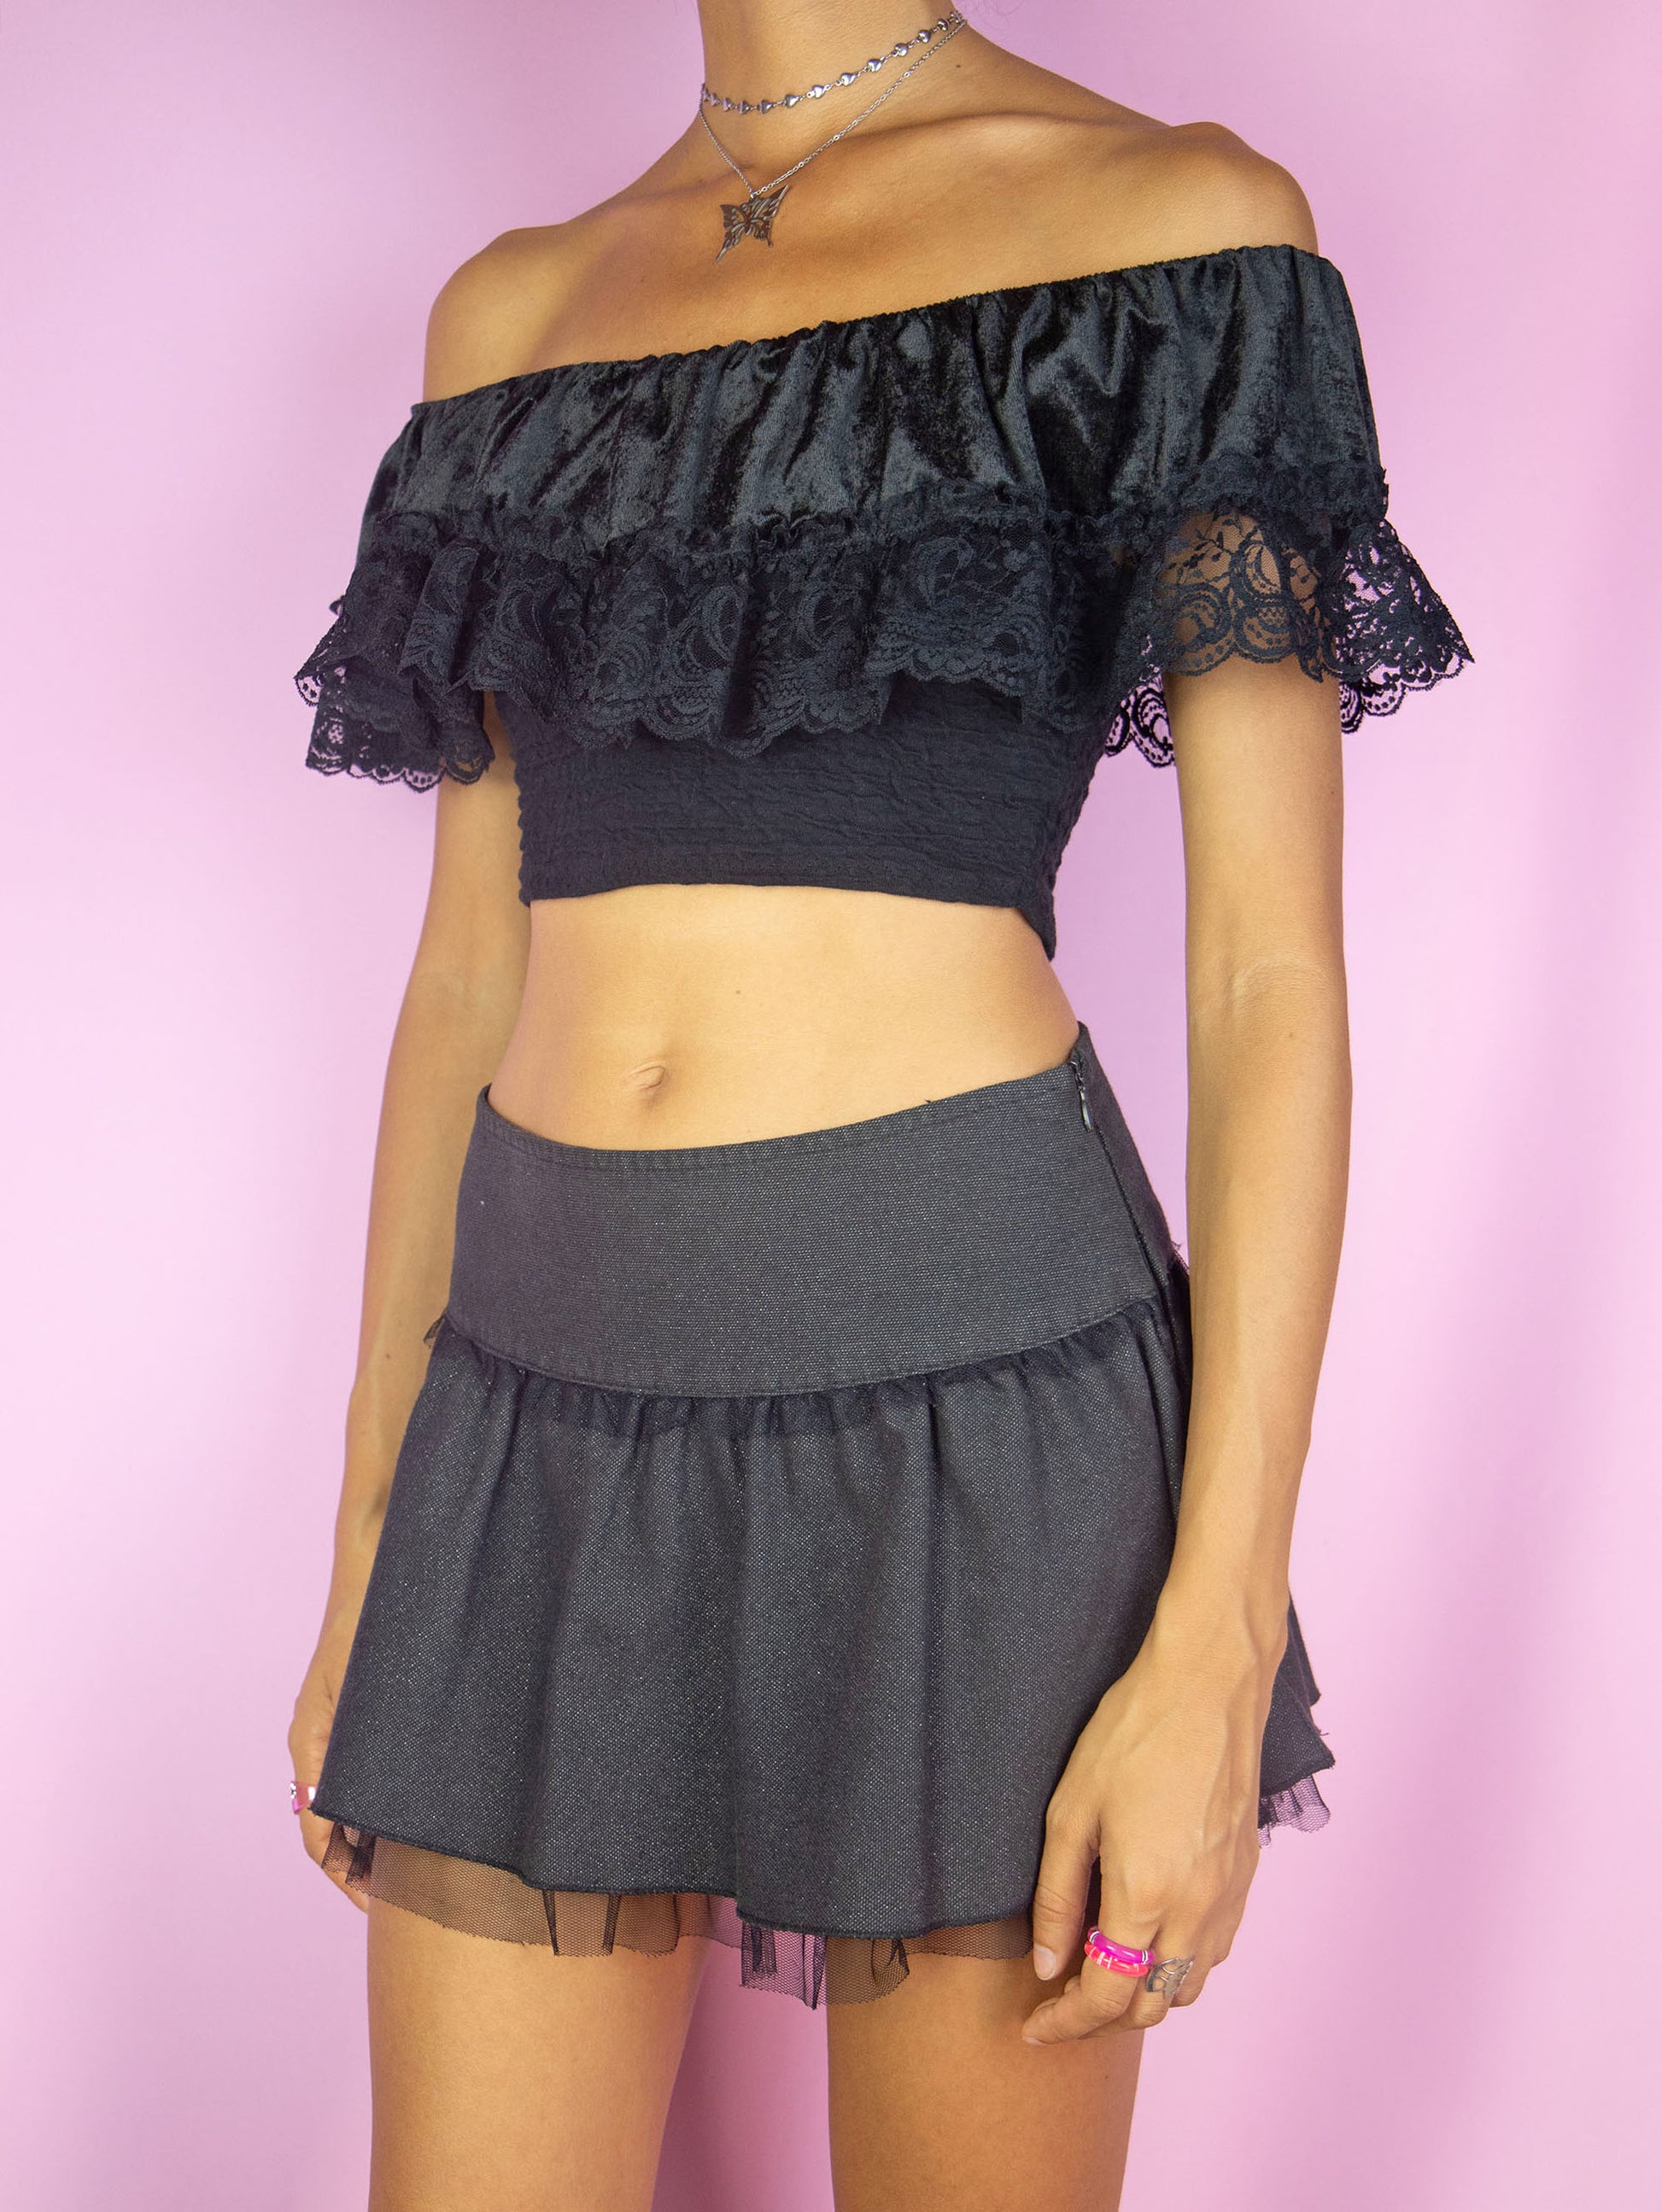 The Vintage 90's Black Off Shoulder Crop Top is a black off shoulder tank top with velvet and lace ruched ruffle detail. Lovely fairy grunge whimsygoth summer party night blouse circa 1990's.